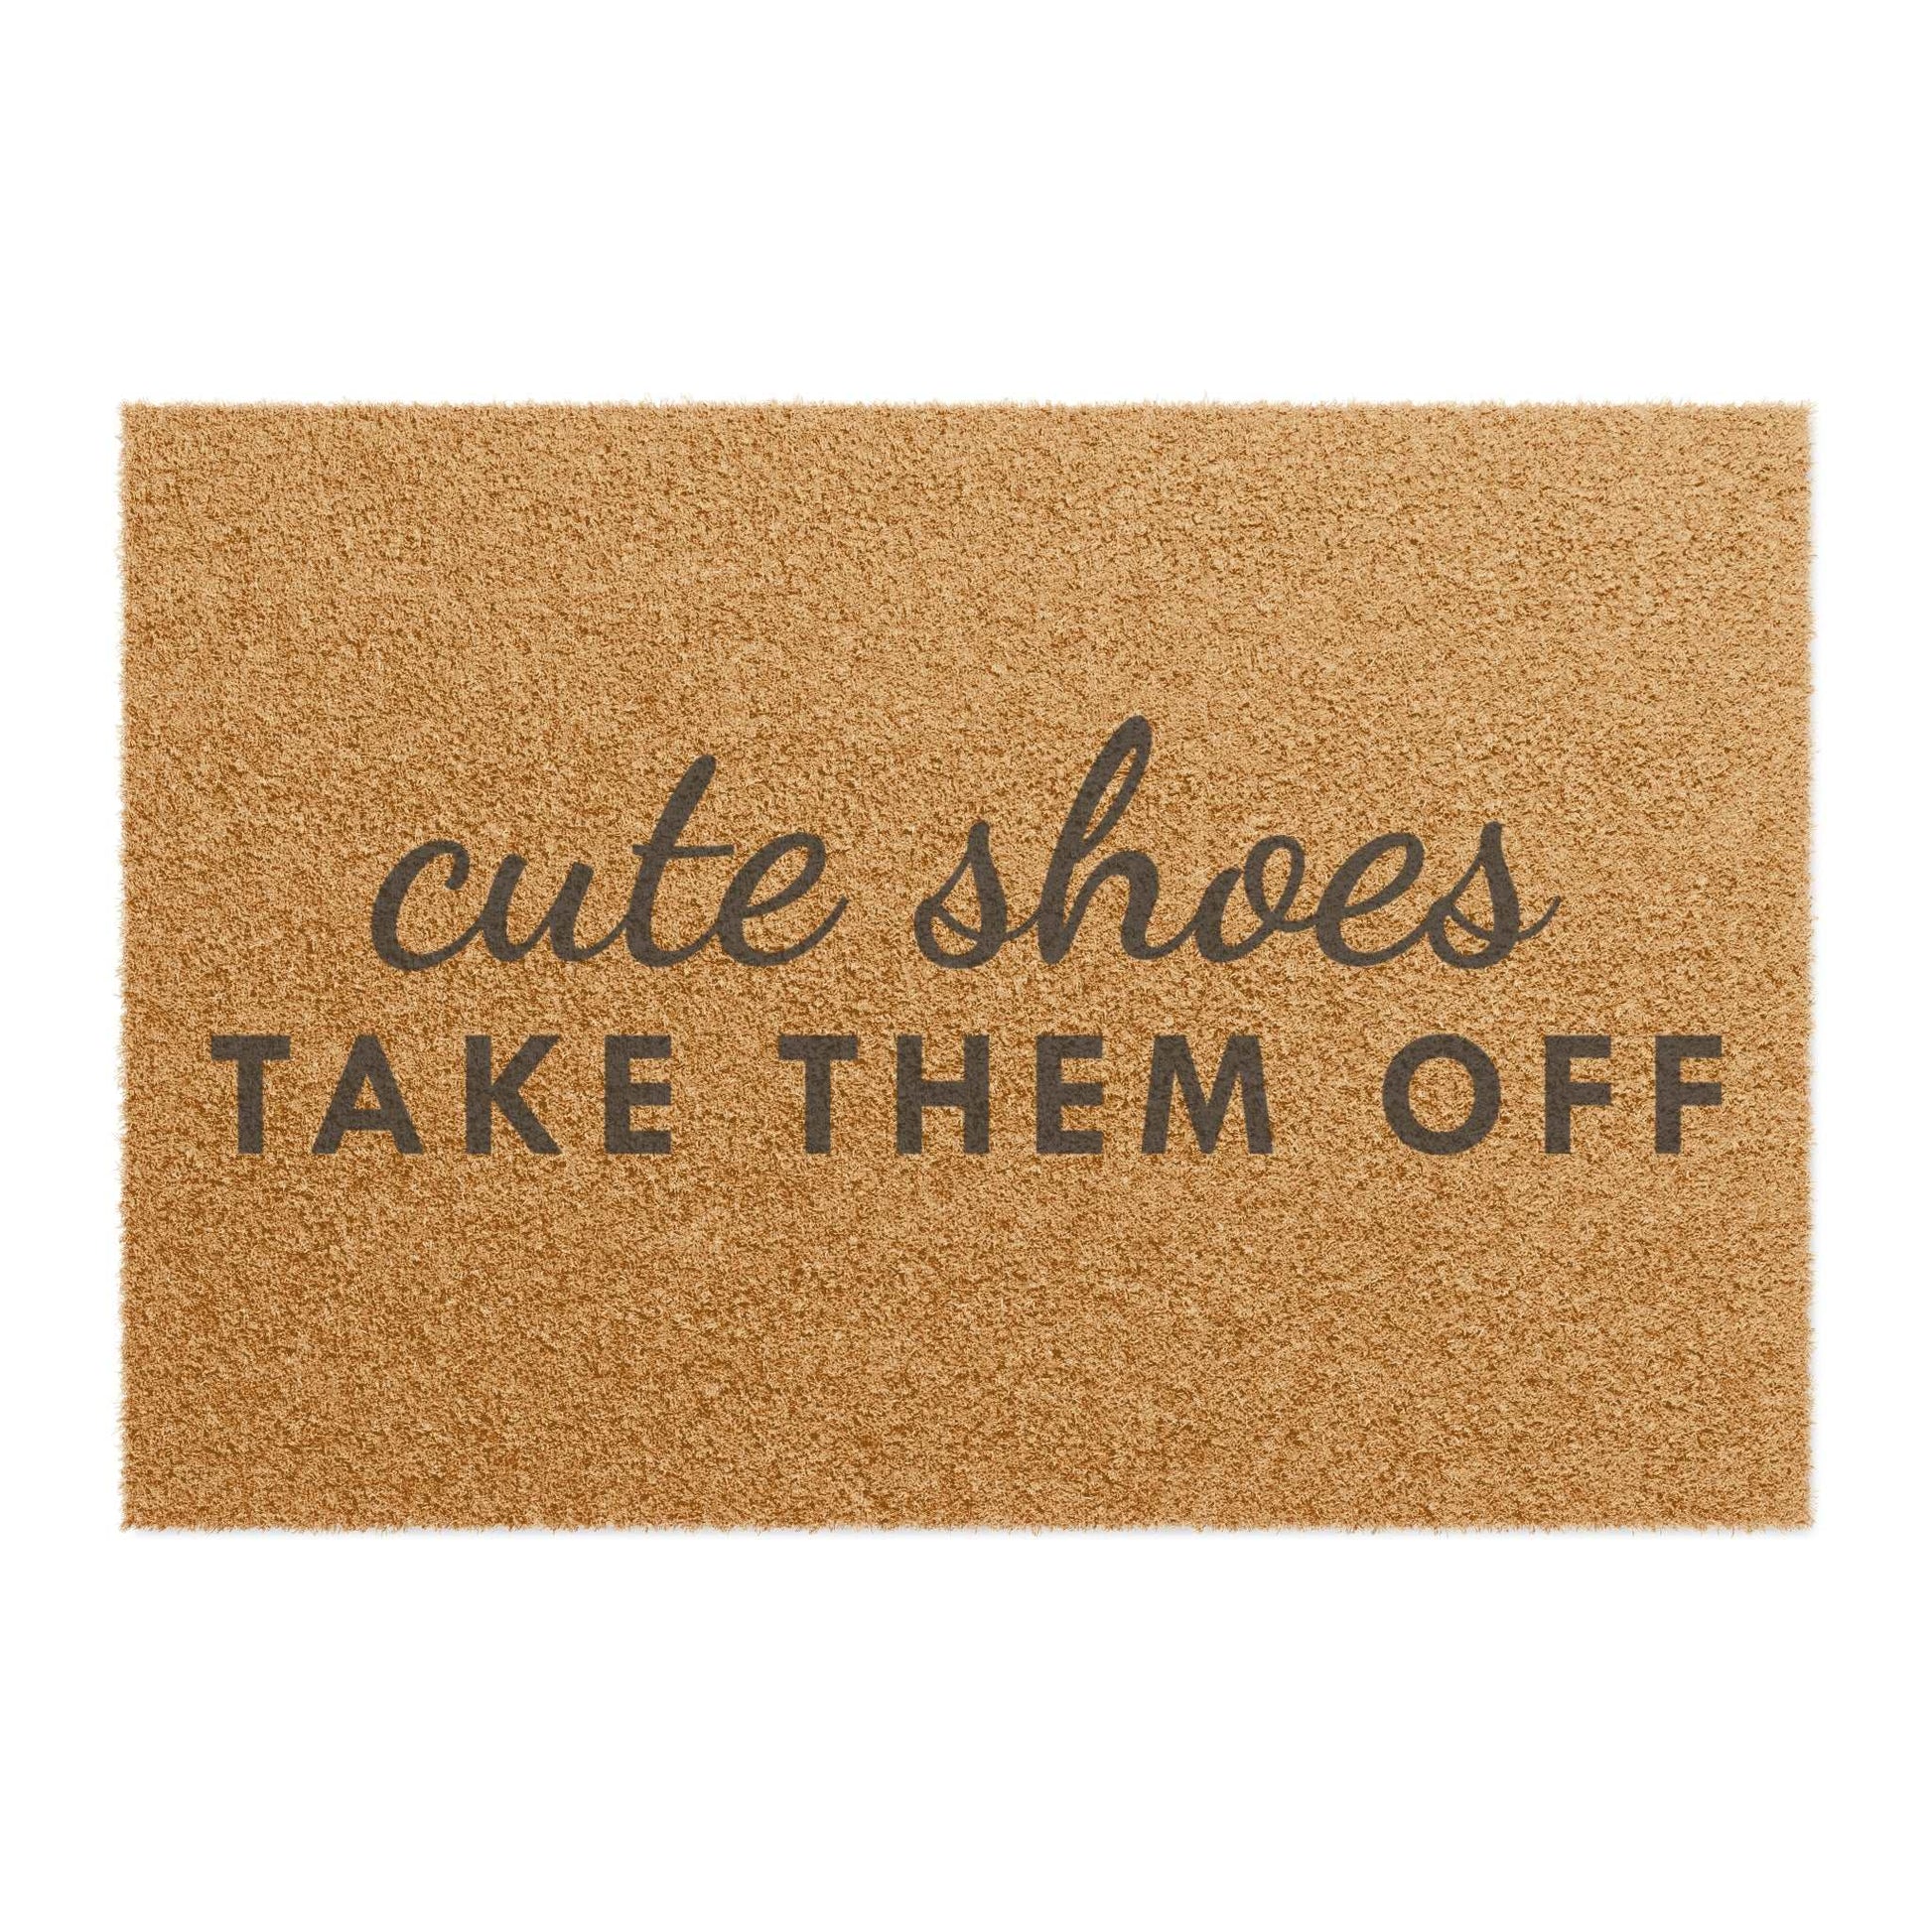 Cute Shoes now take them off Doormat, Funny Doormat, Welcome Doormat | Home Decor | Assembled in the USA, Assembled in USA, Eco-friendly, Funny Doormat, Home & Living, Home Decor, Made in the USA, Made in USA, Outdoor, Please knock so we have time to clean, Rugs & Mats, welcome doormat | Printify